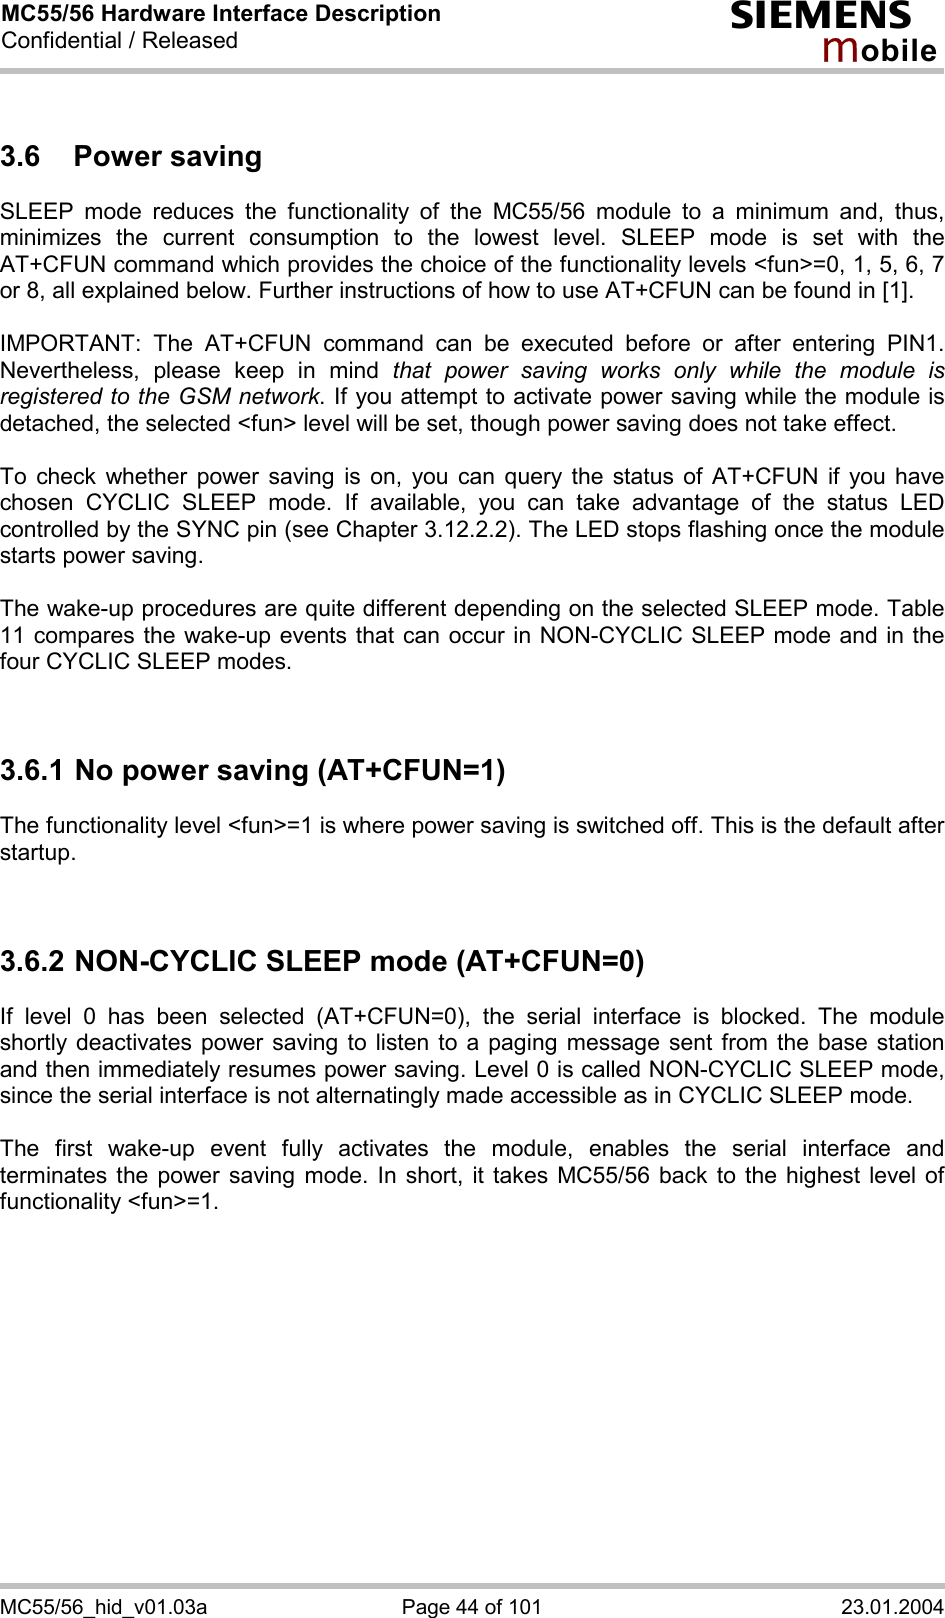 MC55/56 Hardware Interface Description Confidential / Released s mo b i l e MC55/56_hid_v01.03a  Page 44 of 101  23.01.2004 3.6 Power saving SLEEP mode reduces the functionality of the MC55/56 module to a minimum and, thus, minimizes the current consumption to the lowest level. SLEEP mode is set with the AT+CFUN command which provides the choice of the functionality levels &lt;fun&gt;=0, 1, 5, 6, 7 or 8, all explained below. Further instructions of how to use AT+CFUN can be found in [1].  IMPORTANT: The AT+CFUN command can be executed before or after entering PIN1. Nevertheless, please keep in mind that power saving works only while the module is registered to the GSM network. If you attempt to activate power saving while the module is detached, the selected &lt;fun&gt; level will be set, though power saving does not take effect.  To check whether power saving is on, you can query the status of AT+CFUN if you have chosen CYCLIC SLEEP mode. If available, you can take advantage of the status LED controlled by the SYNC pin (see Chapter 3.12.2.2). The LED stops flashing once the module starts power saving.  The wake-up procedures are quite different depending on the selected SLEEP mode. Table 11 compares the wake-up events that can occur in NON-CYCLIC SLEEP mode and in the four CYCLIC SLEEP modes.   3.6.1 No power saving (AT+CFUN=1) The functionality level &lt;fun&gt;=1 is where power saving is switched off. This is the default after startup.    3.6.2 NON-CYCLIC SLEEP mode (AT+CFUN=0) If level 0 has been selected (AT+CFUN=0), the serial interface is blocked. The module shortly deactivates power saving to listen to a paging message sent from the base station and then immediately resumes power saving. Level 0 is called NON-CYCLIC SLEEP mode, since the serial interface is not alternatingly made accessible as in CYCLIC SLEEP mode.  The first wake-up event fully activates the module, enables the serial interface and terminates the power saving mode. In short, it takes MC55/56 back to the highest level of functionality &lt;fun&gt;=1.  